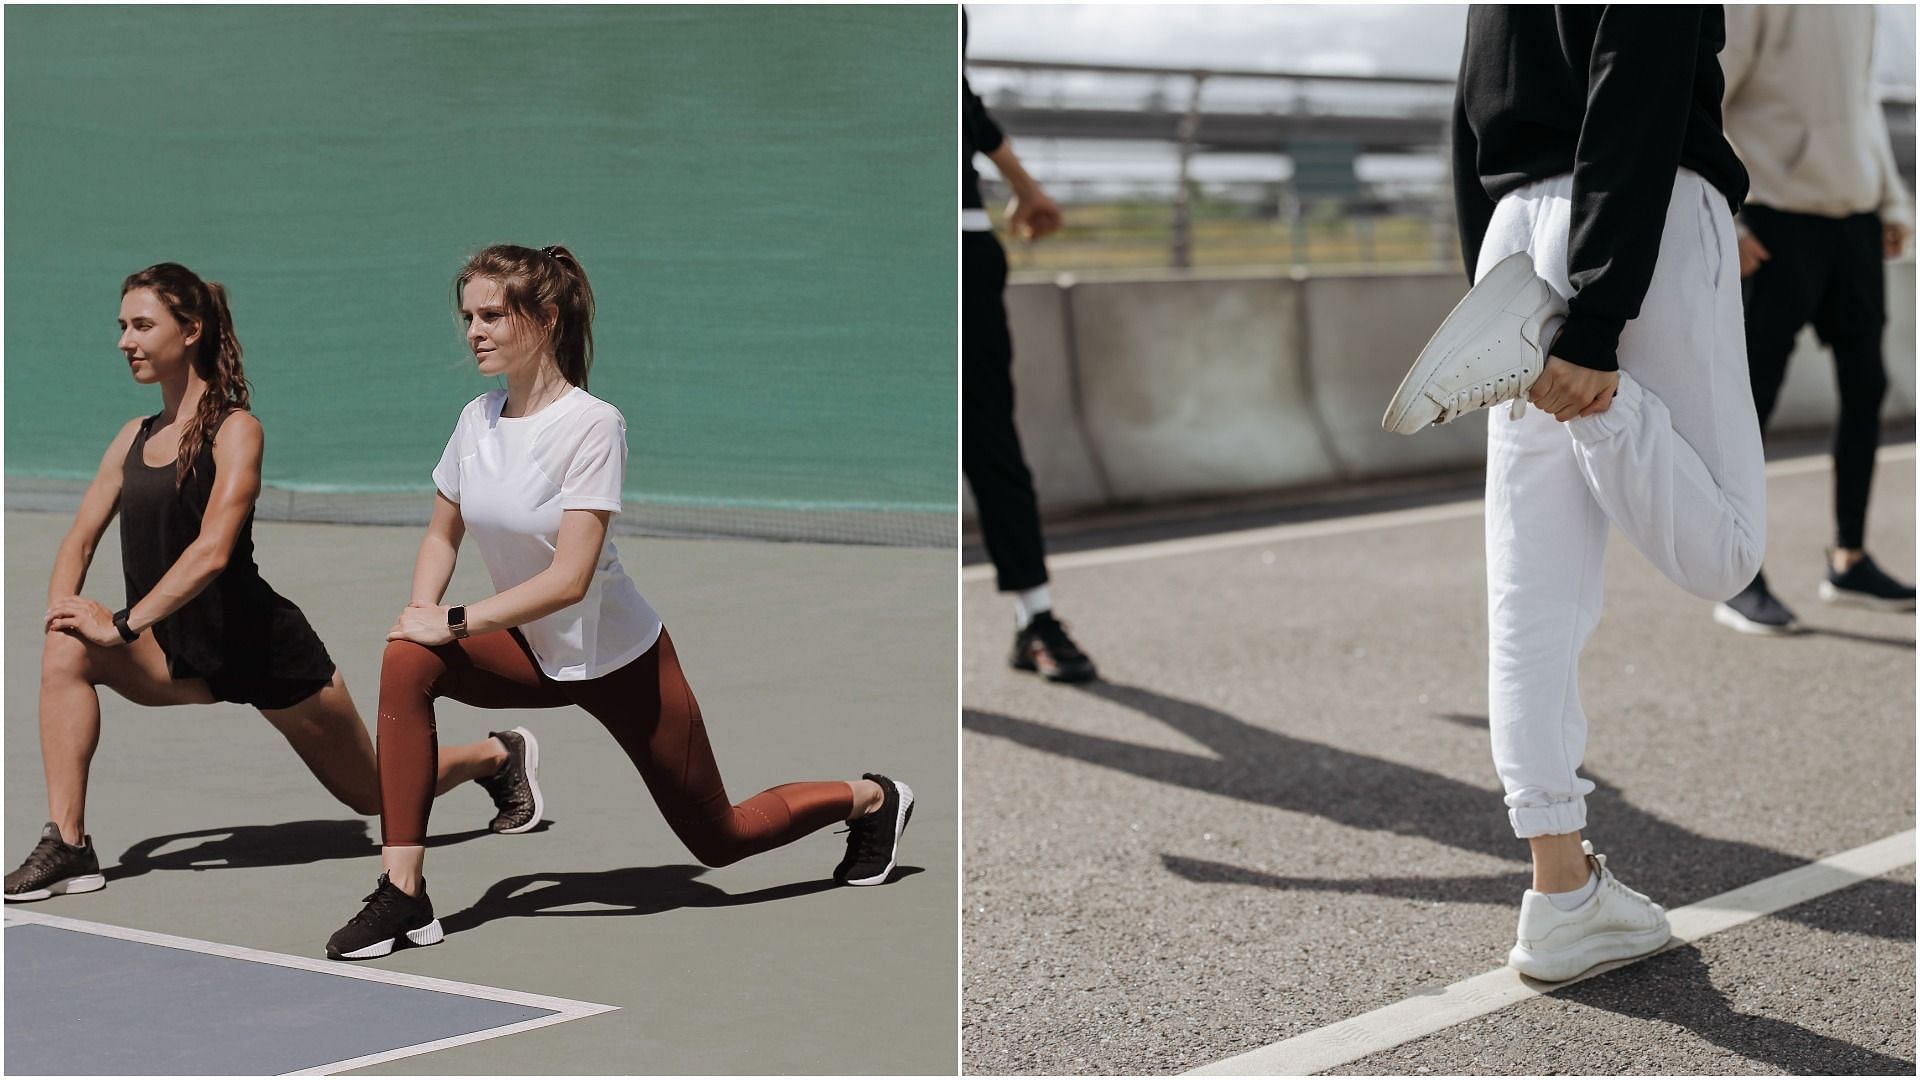 Difference between warmup and stretches. (Left Image by Maksim Goncharenok; Right Image by cottonbro / Pexels)